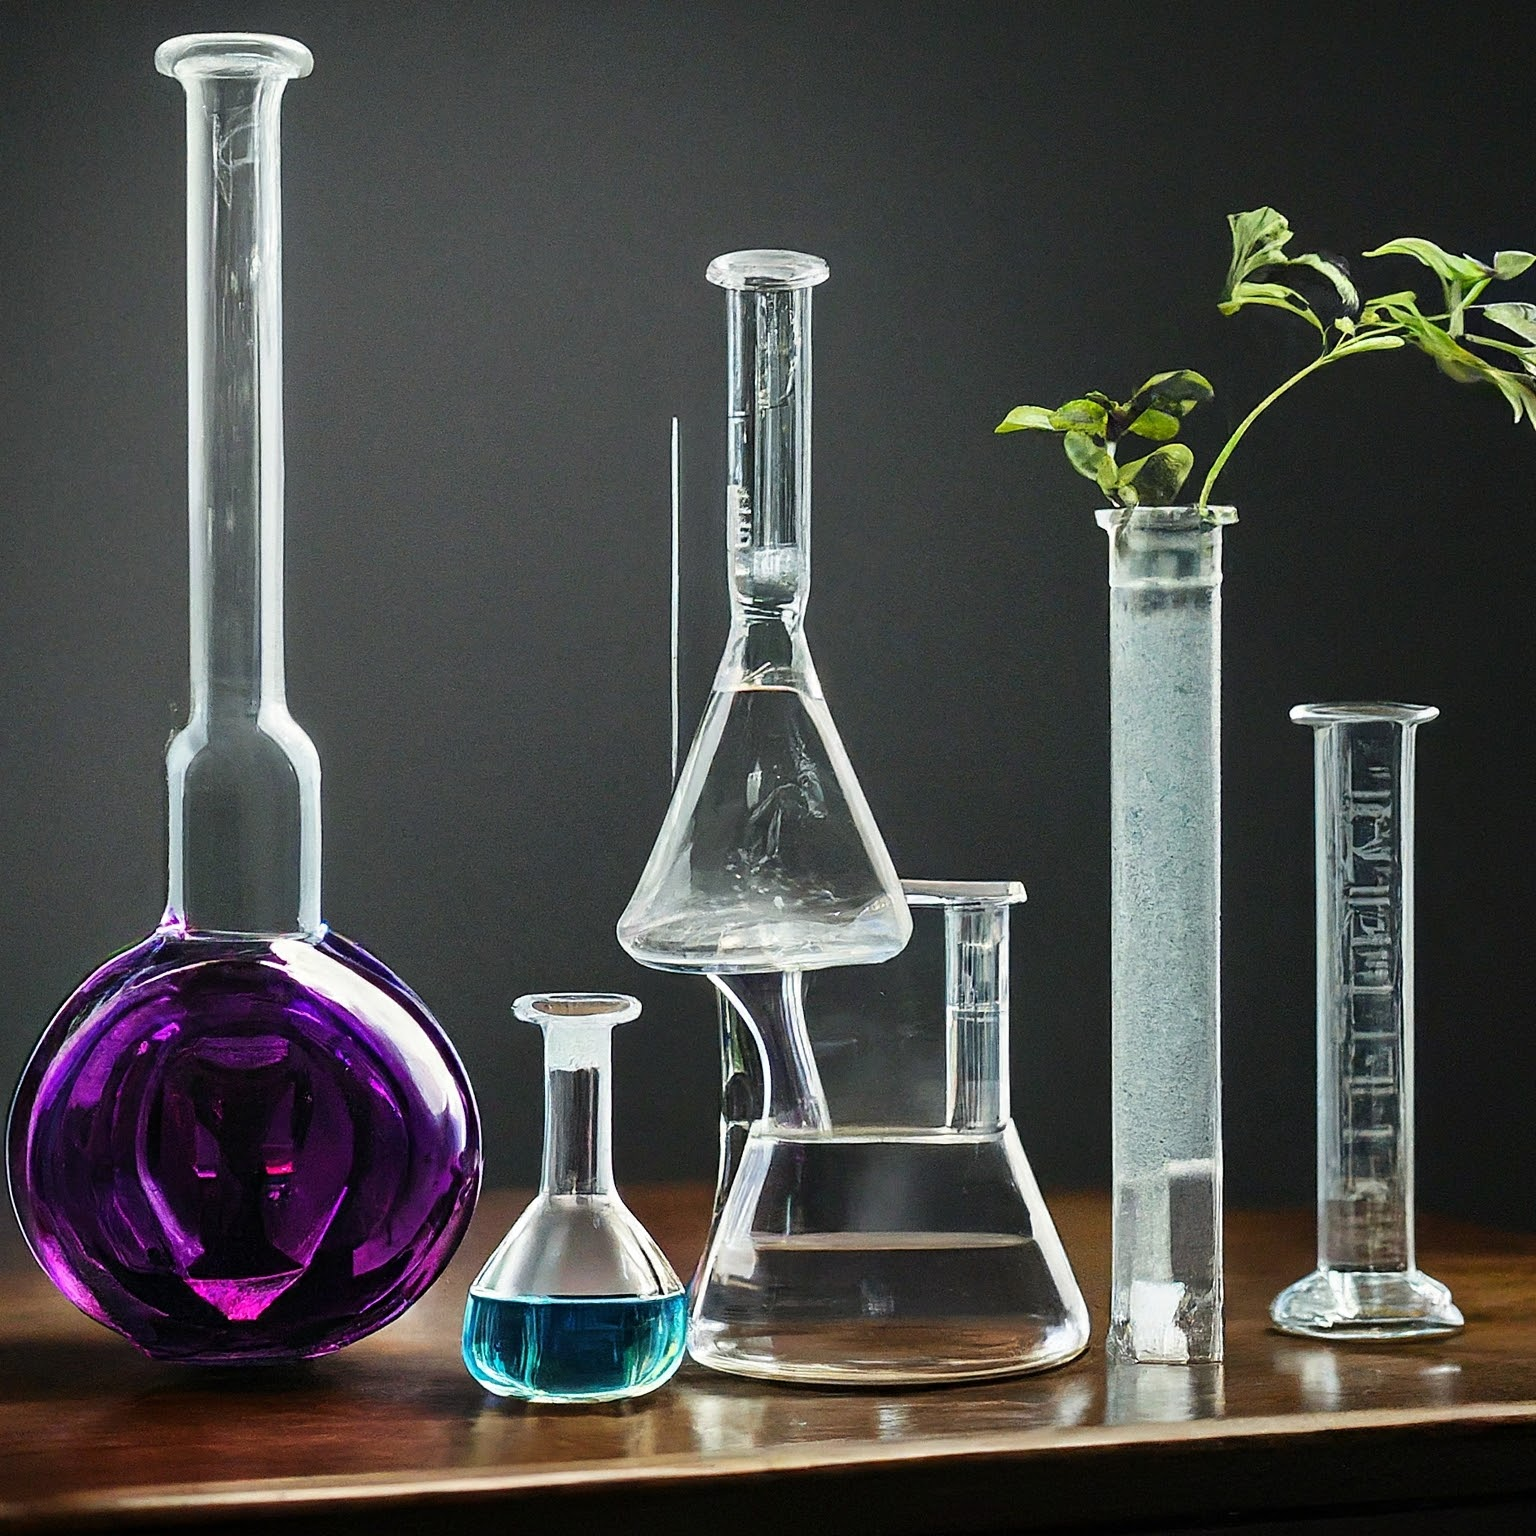 Various liquid measuring cups and beakers with measurements